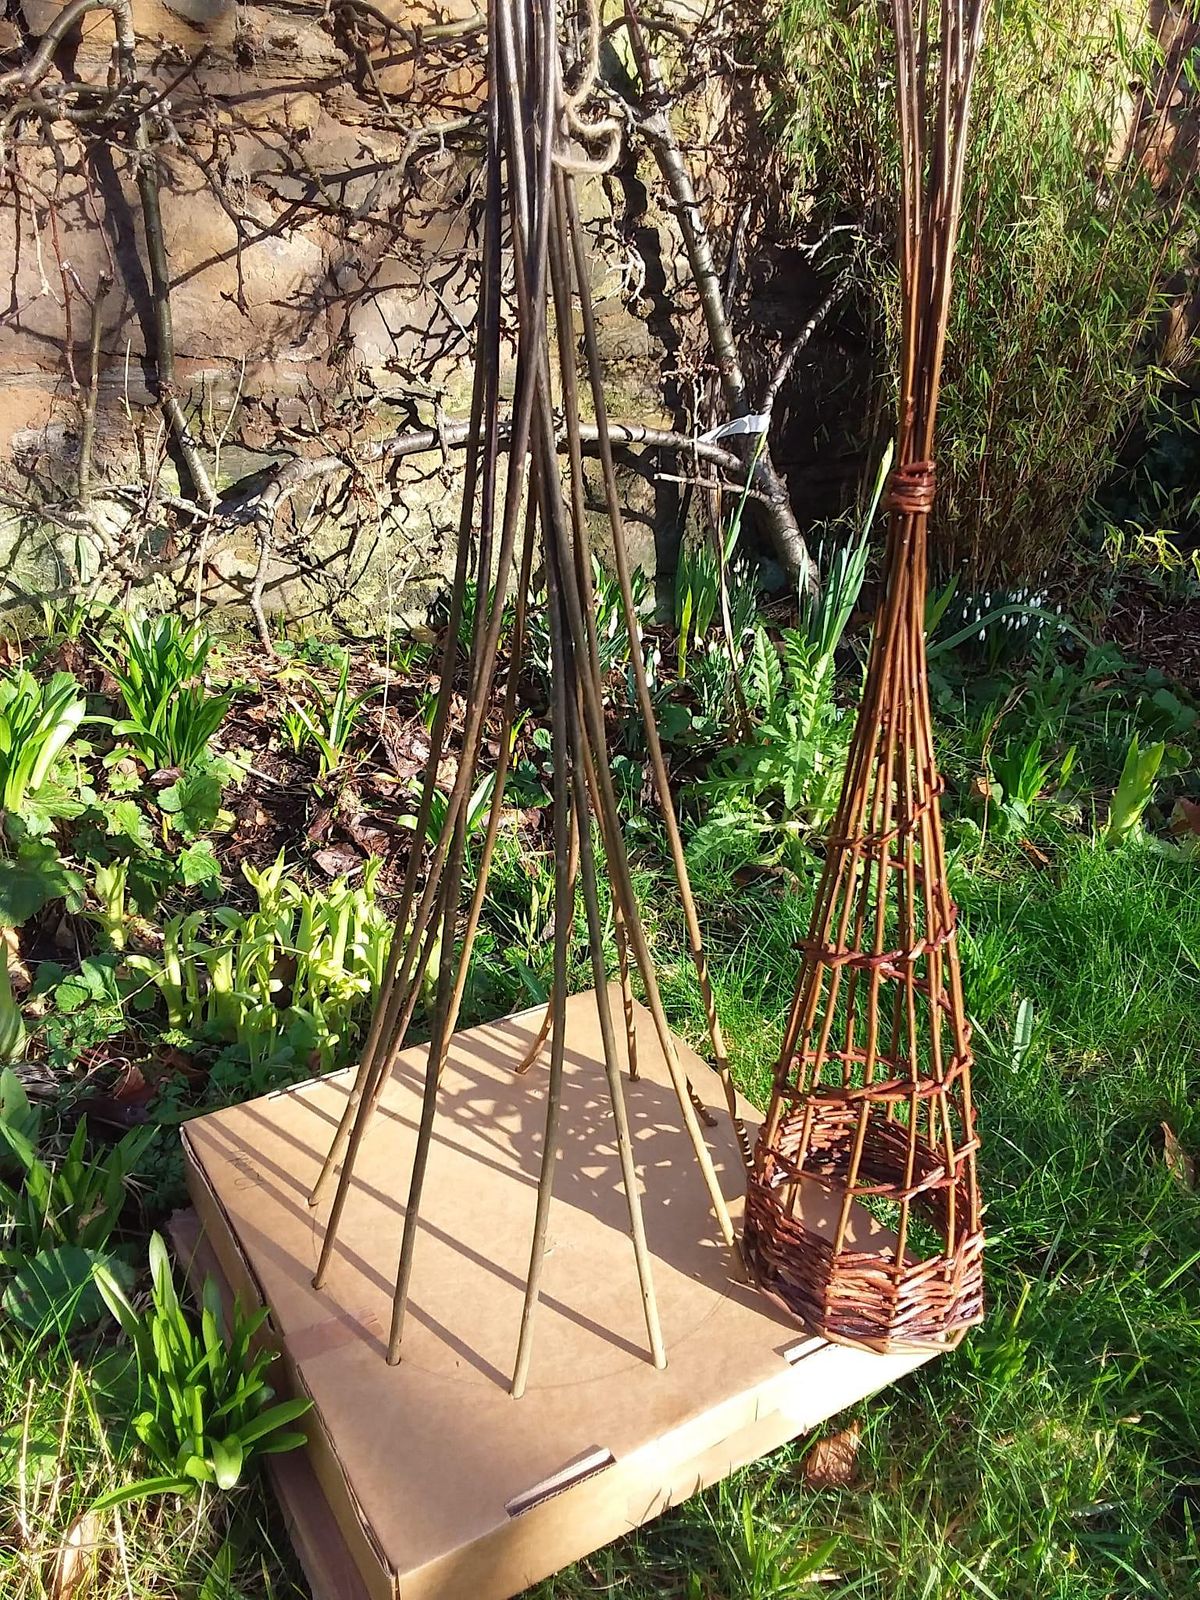 Basic willow techniques